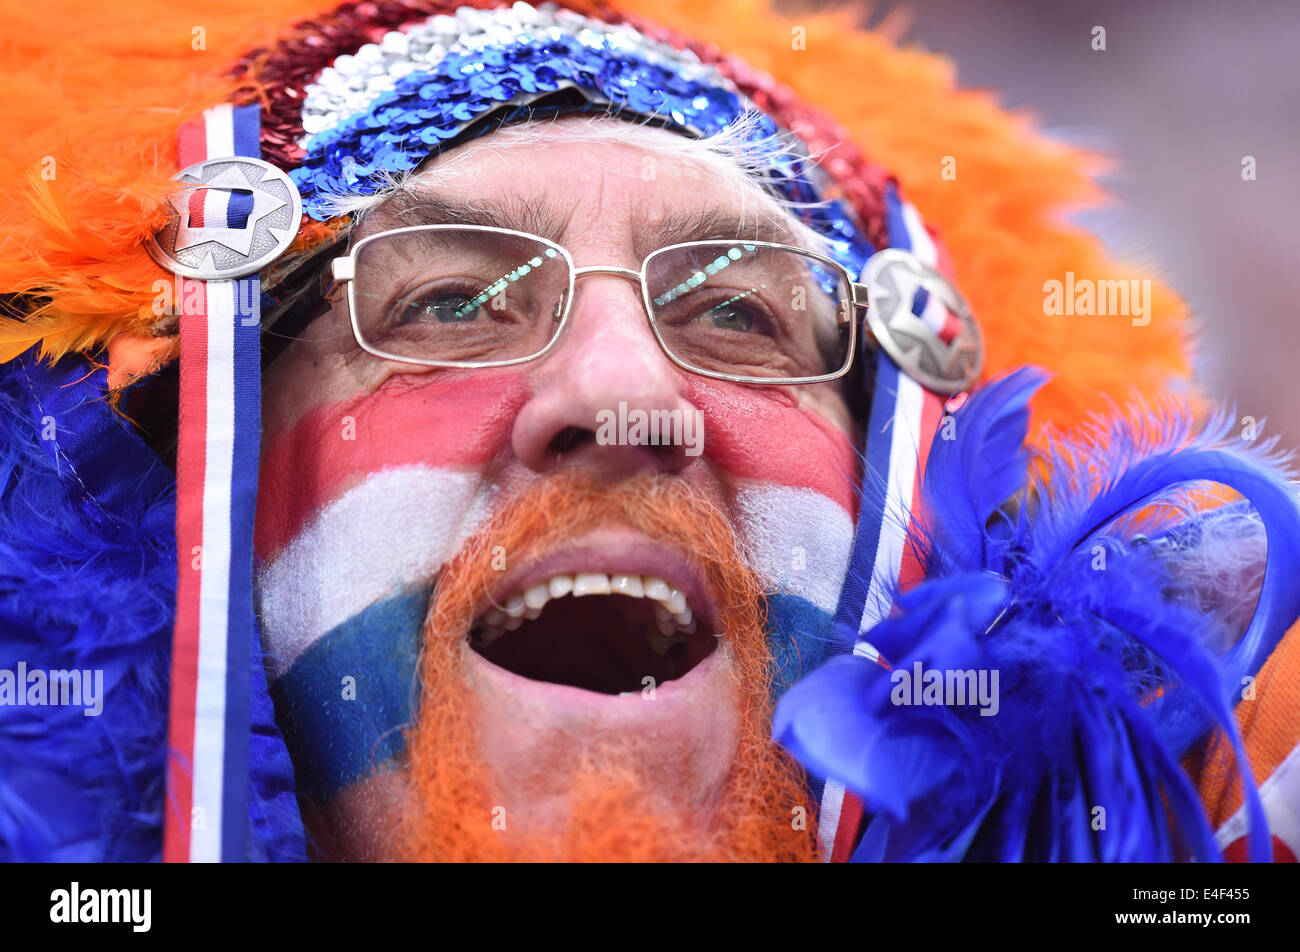 Sao Paulo, Brazil. 09th July, 2014. Supporter of the Netherlands cheers before the FIFA World Cup 2014 semi-final soccer match between the Netherlands and Argentina at the Arena Corinthians in Sao Paulo, Brazil, 09 July 2014. Photo: Marius Becker/dpa/Alamy Live News Stock Photo